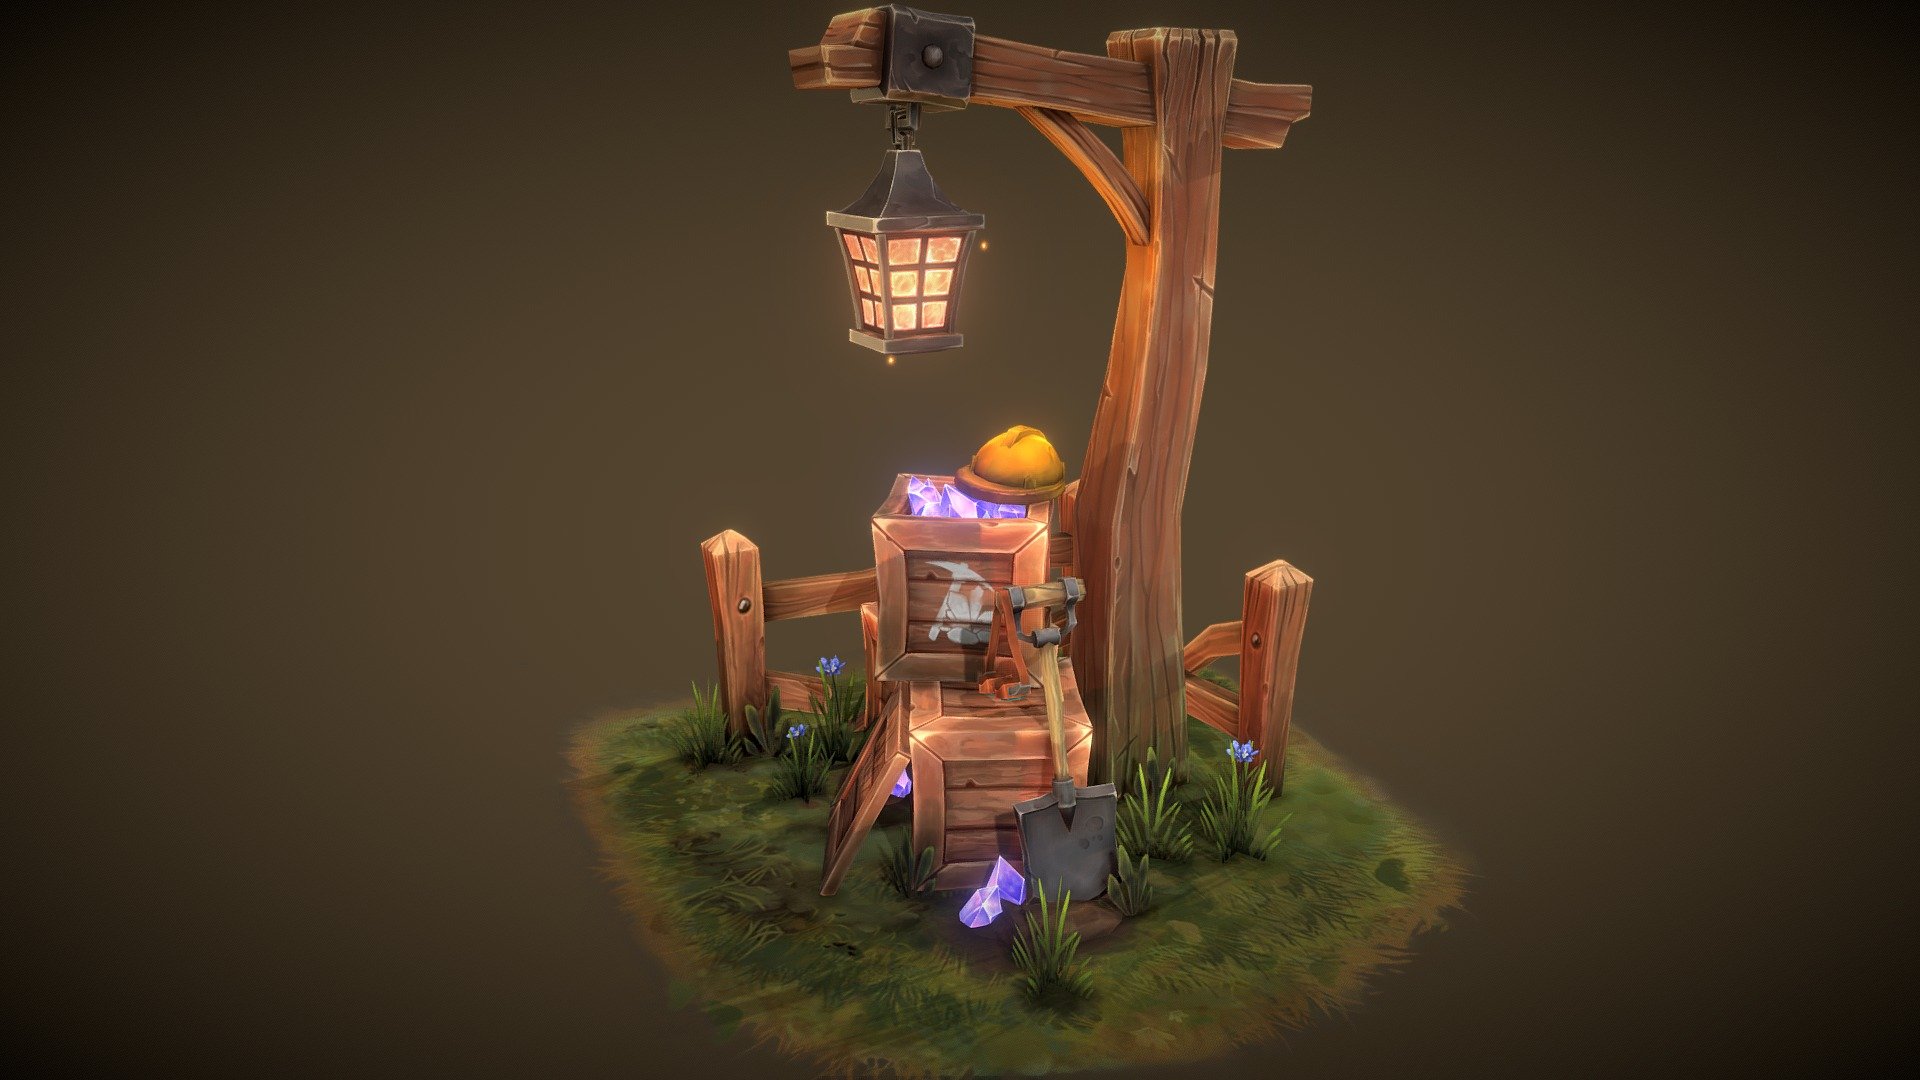 This is a small diorama I created primarily to work on my texturing skills and improving the stylization of my models. This work was inspired by World of Warcraft so I wanted to make it look like it could fit into that world and I'm pleased with how it turned out!

This is the unlit version of the model, I uploaded them both because I didn't know which version I preferred. You can see the unlit version here: https://sketchfab.com/3d-models/digging-for-treasure-unlit-18029909eeb7412eb2cc40c1f077f9fd

https://www.artstation.com/andrew_melfi - Digging for Treasure [Lit] - 3D model by andrewmelfi 3d model